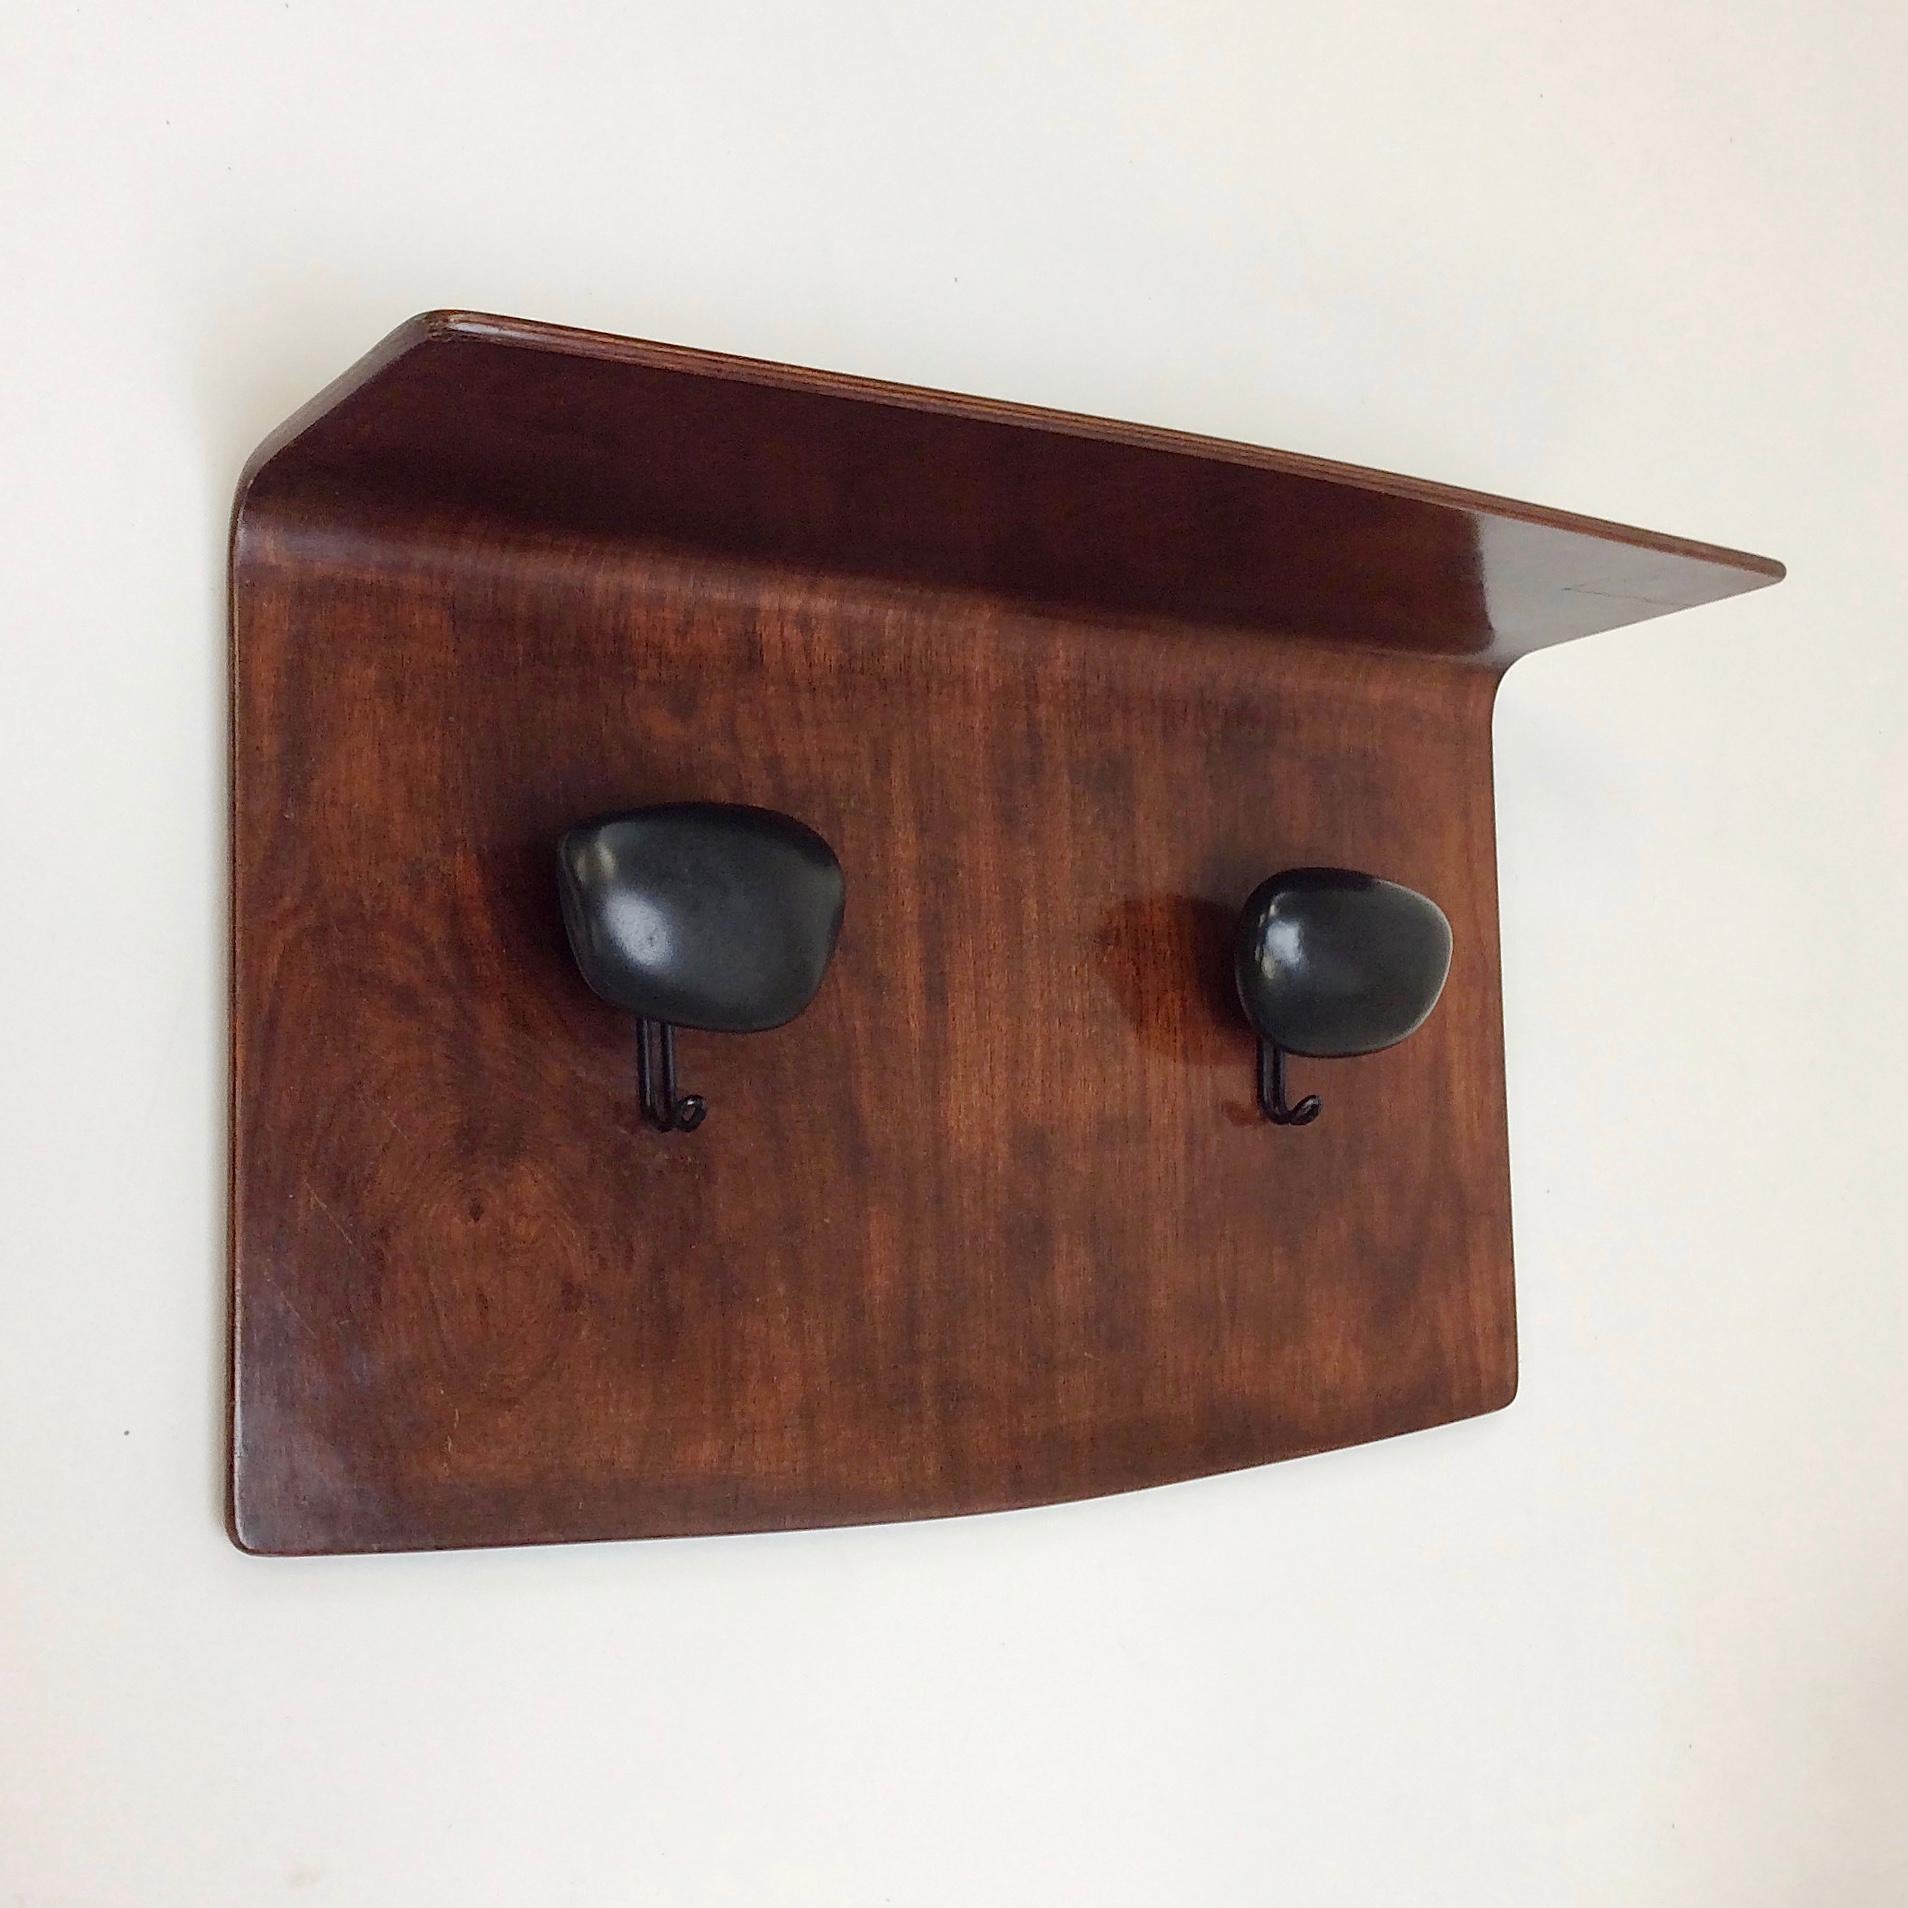 Rare Franco Campo and Carlo Graffi wall-mounted coat rack for Turino Home, circa 1950, Italy.
Plywood, metal and black ceramic.
Dimensions: 68 cm W, 41 cm H, 24 cm D.
All purchases are covered by our Buyer Protection Guarantee.

   